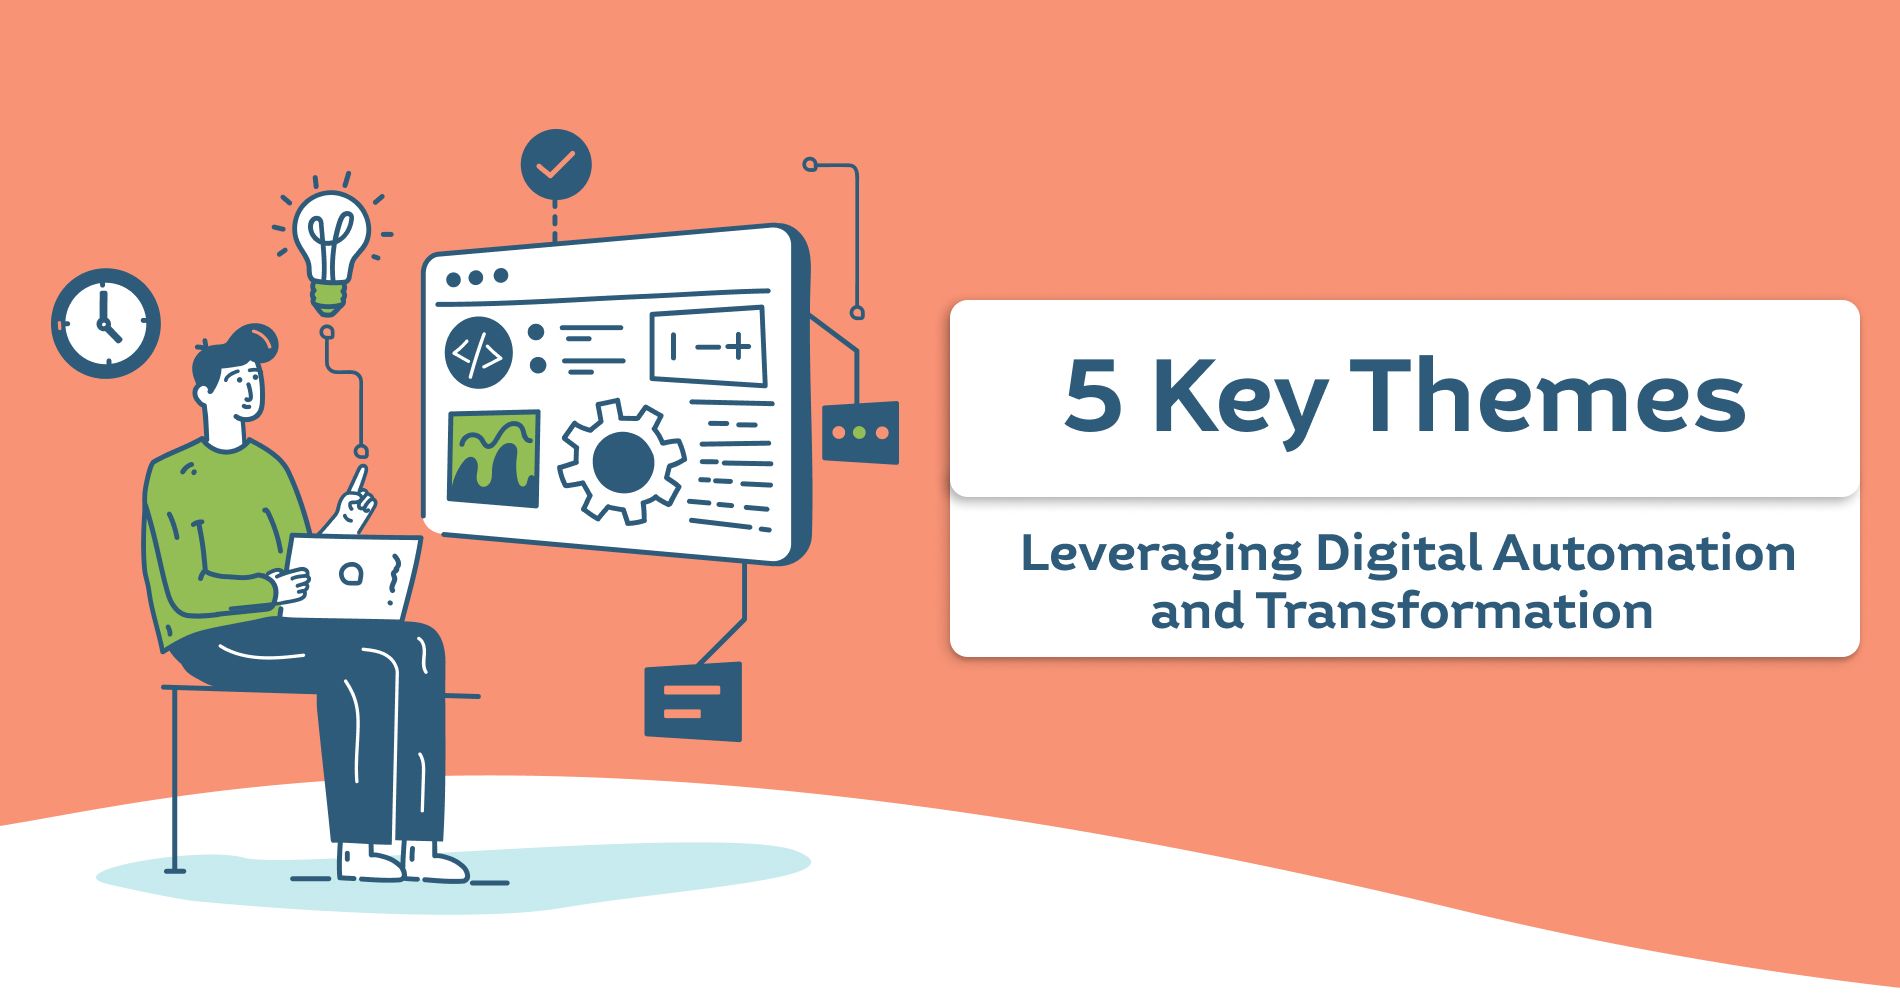 5 Key Themes: Leveraging Digital Automation and Transformation